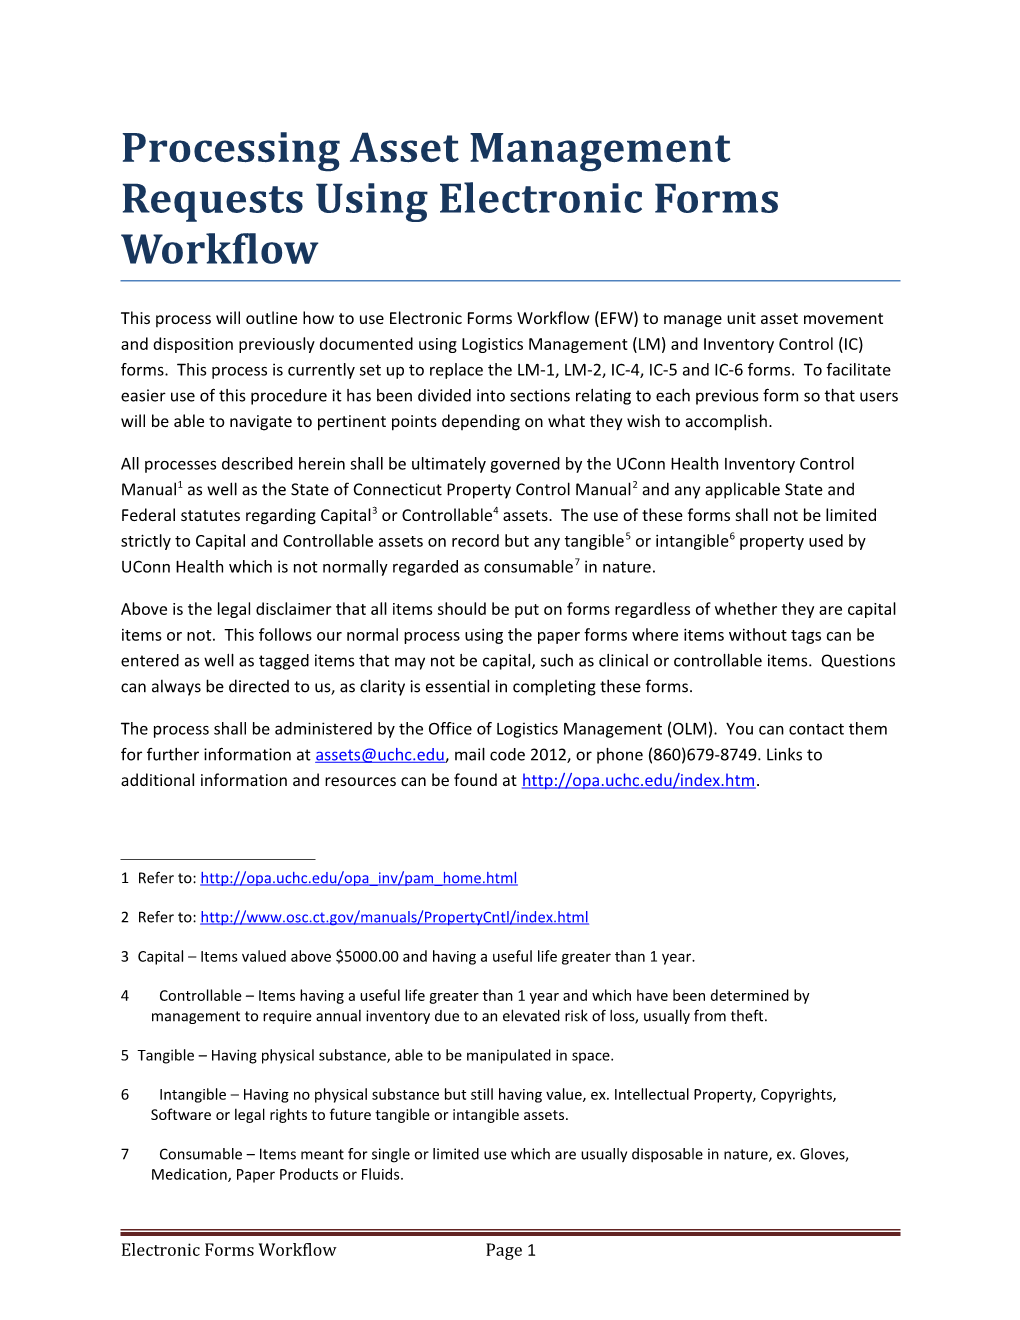 Processing Asset Management Requests Using Electronic Forms Workflow